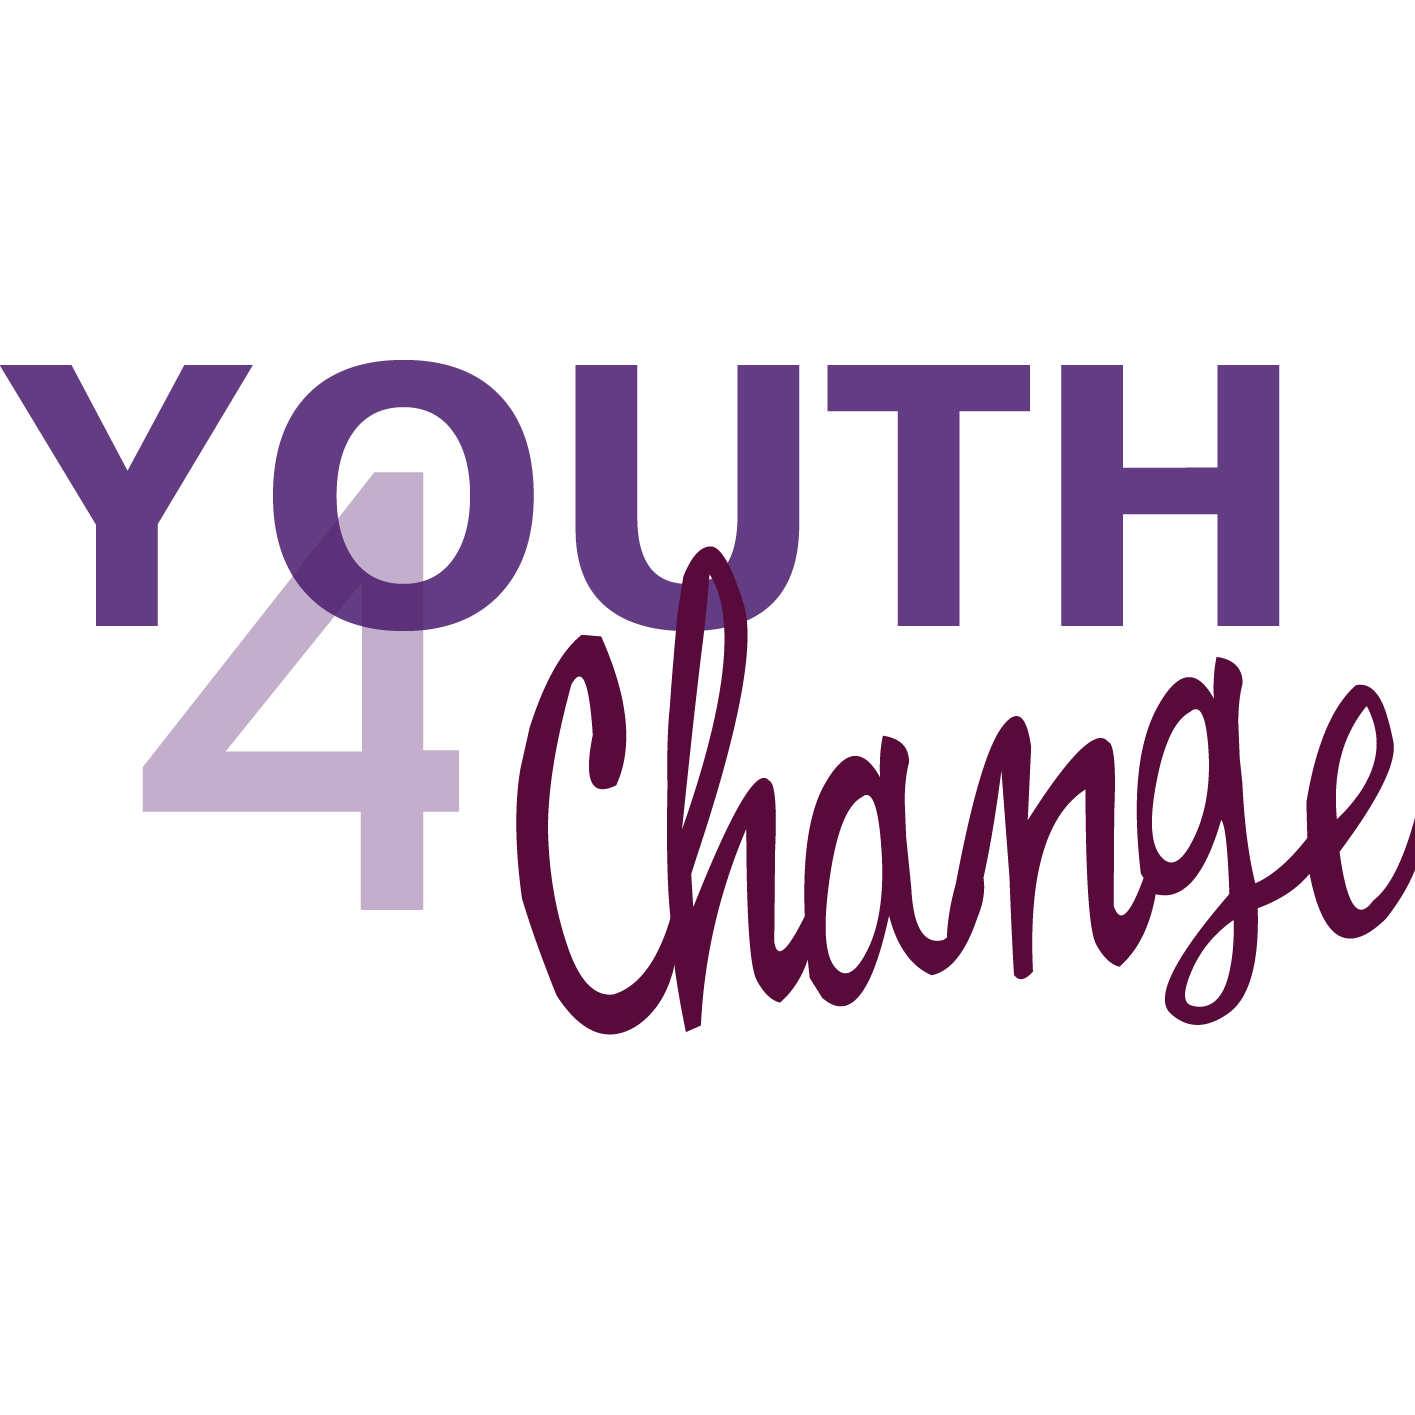 Global network of NGOs dedicated to youth empowerment                                  - Be part of the network, be part of the change -